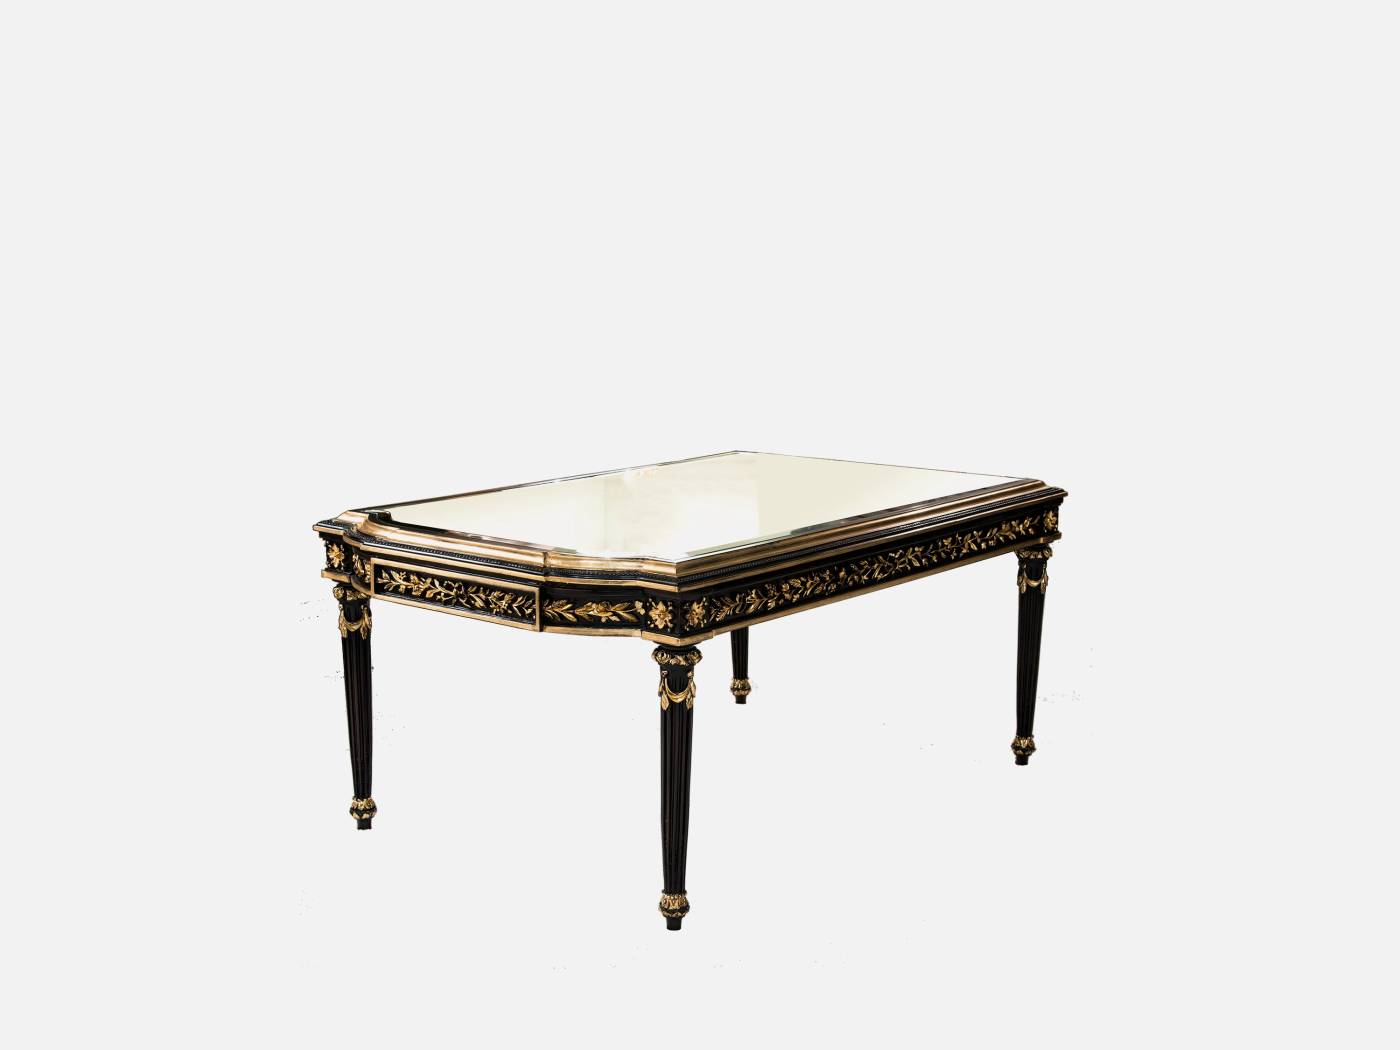 ART. 2228 – Discover the elegance of luxury classic Small tables made in Italy by C.G. Capelletti. Luxury classic furniture that combines style and craftsmanship.